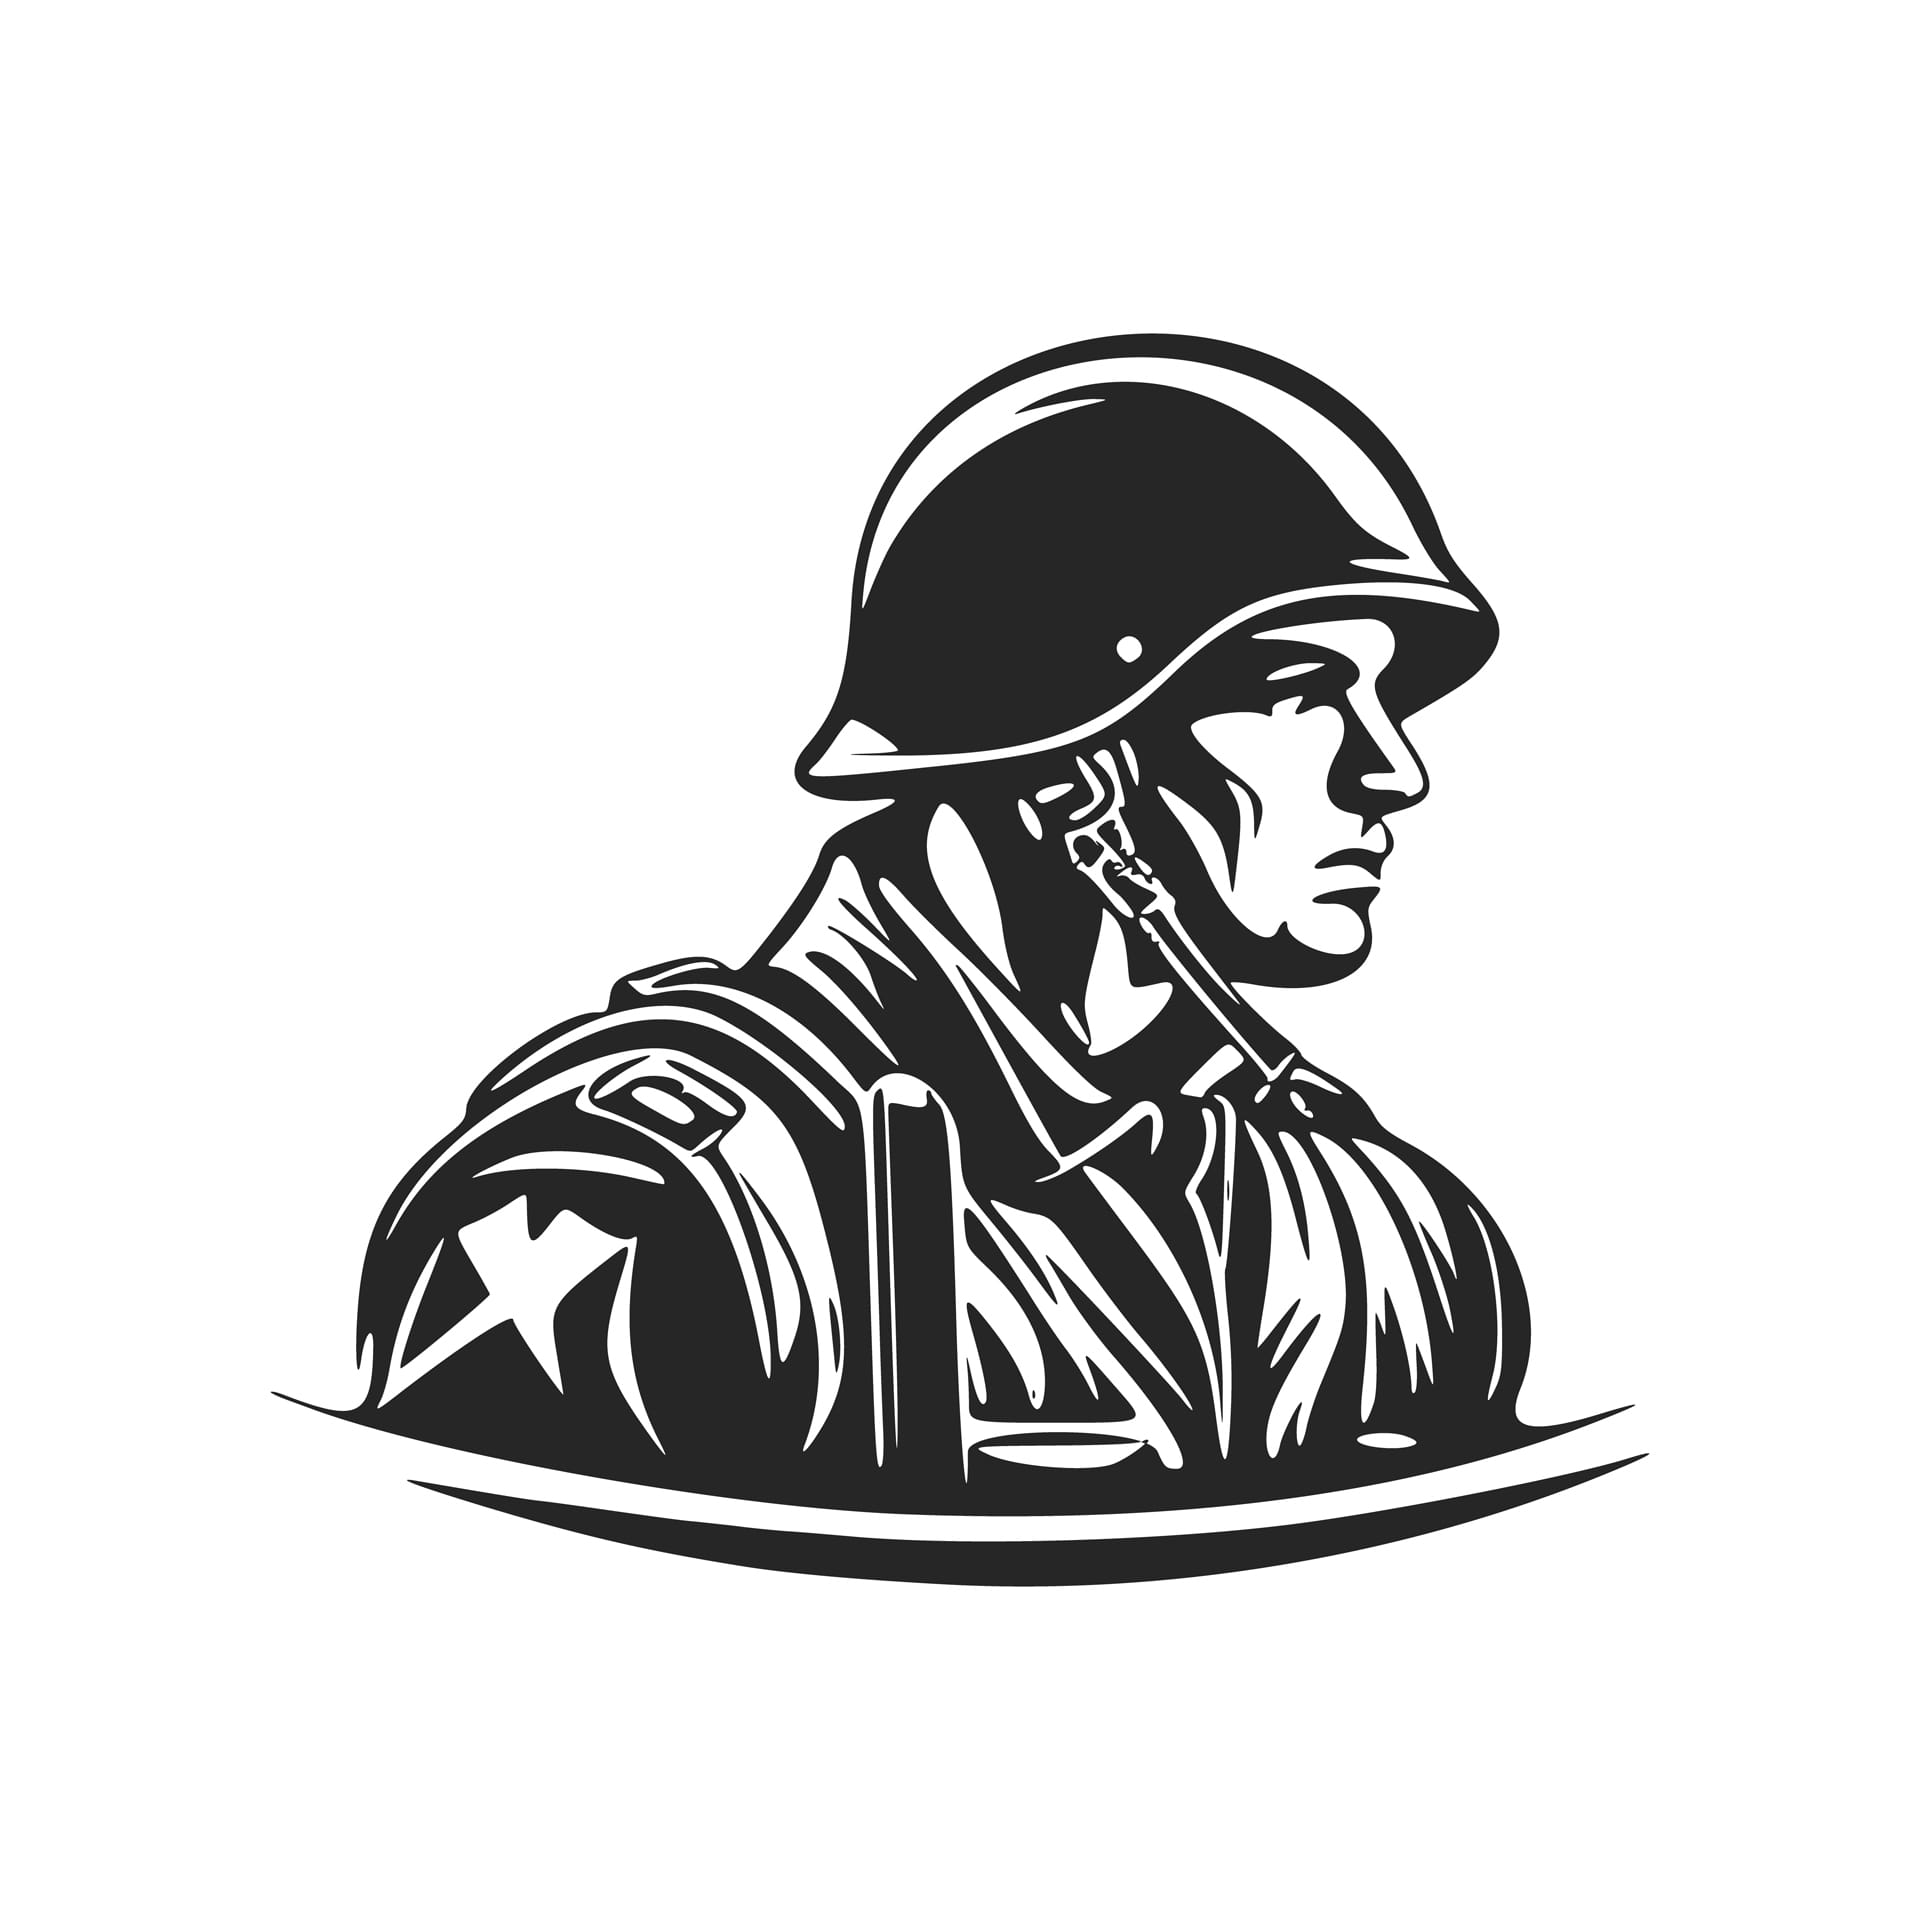 Black white modern depicting soldier military profile pictures